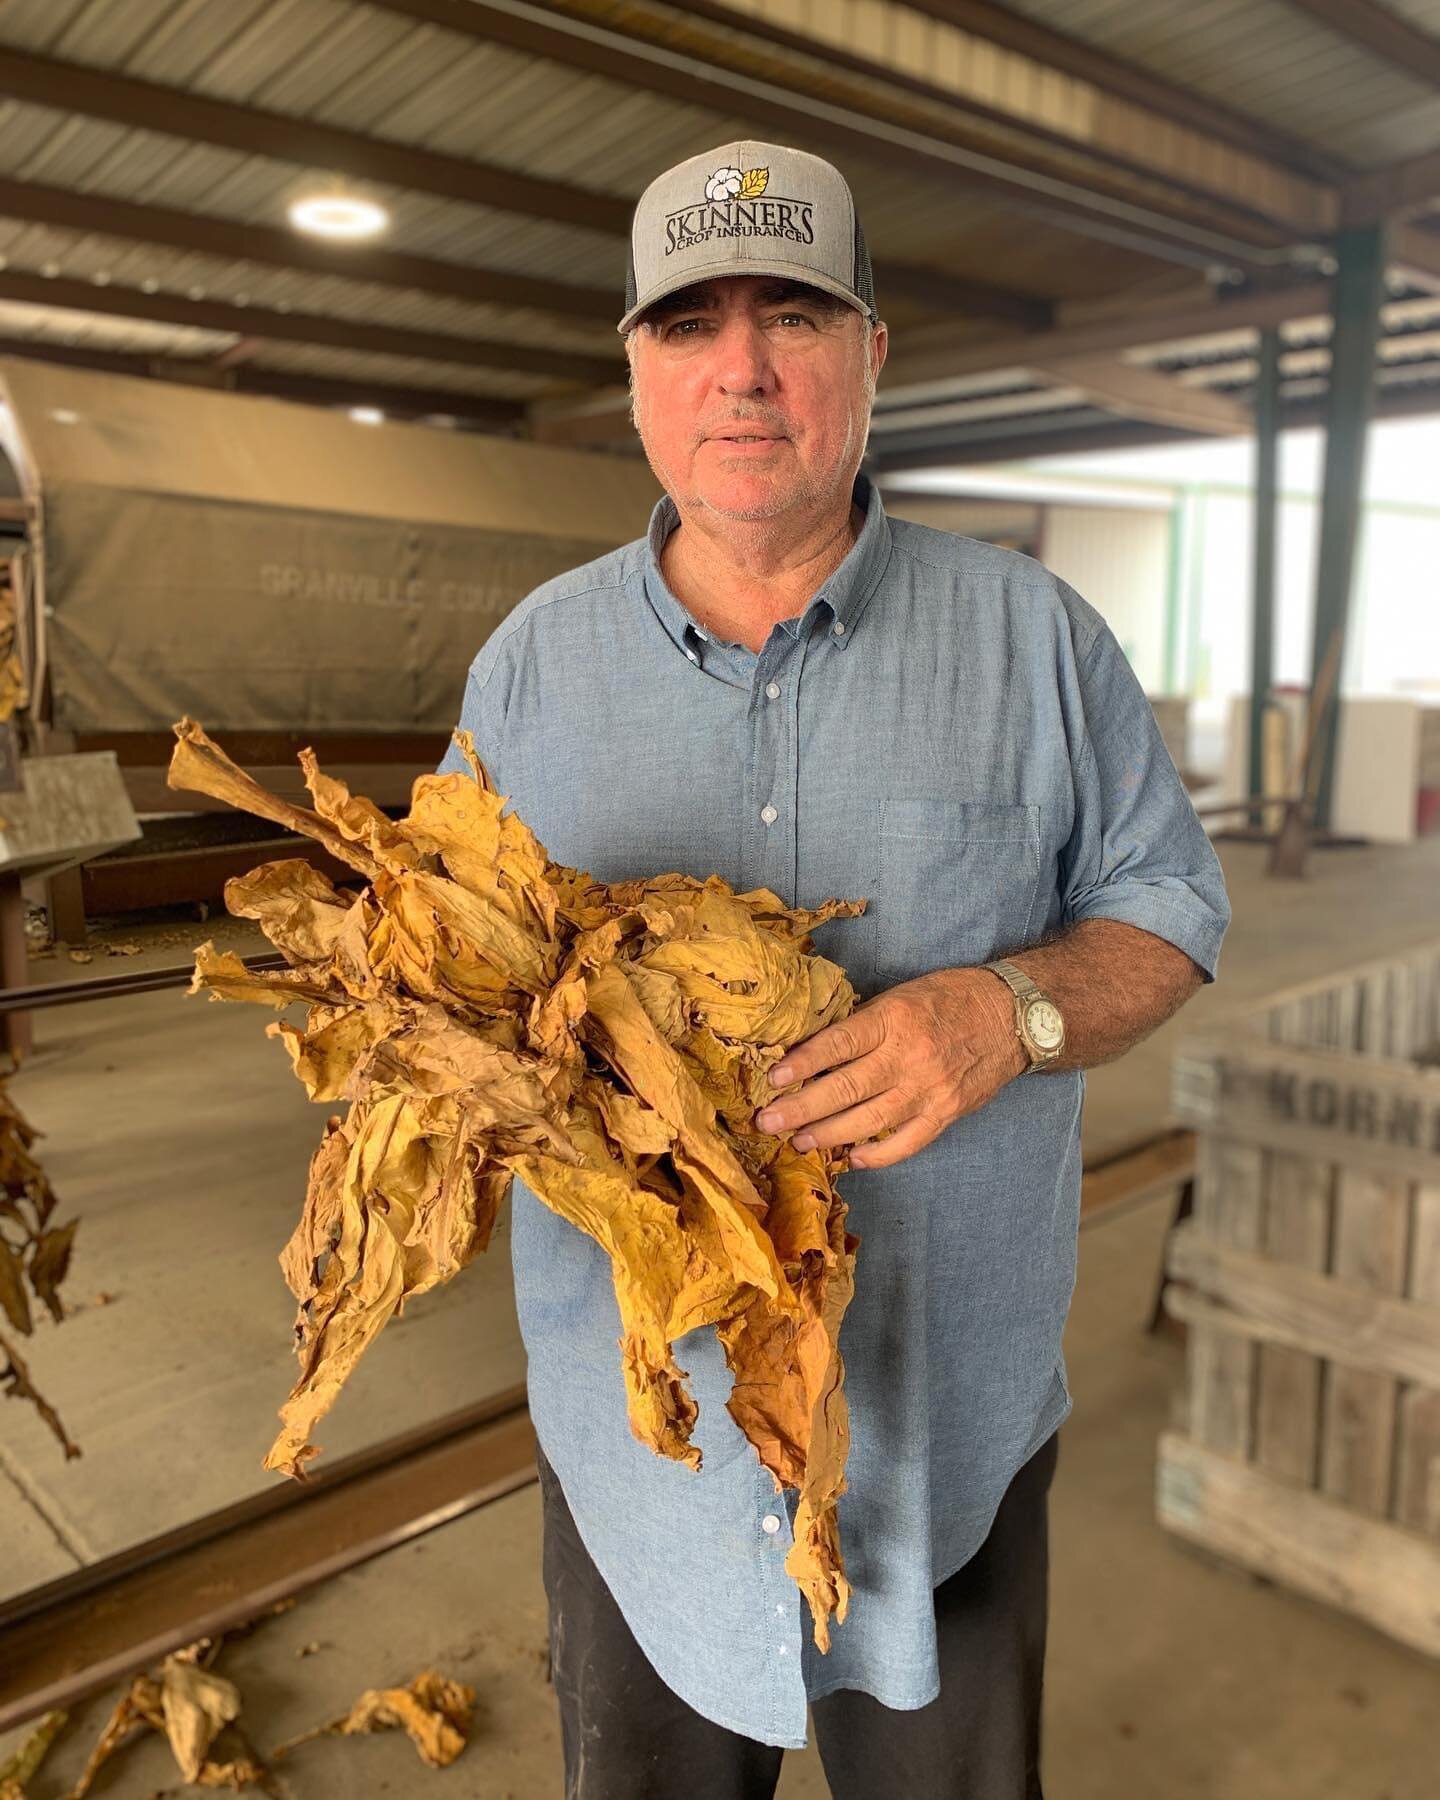 Yesterday was a day of celebration on the farm, but today was a day of sadness as our dear friend, Ronnie Strickland died in his sleep overnight. 
Ronnie was an artist at curing tobacco and loved to talk about all things related to the golden leaf.  